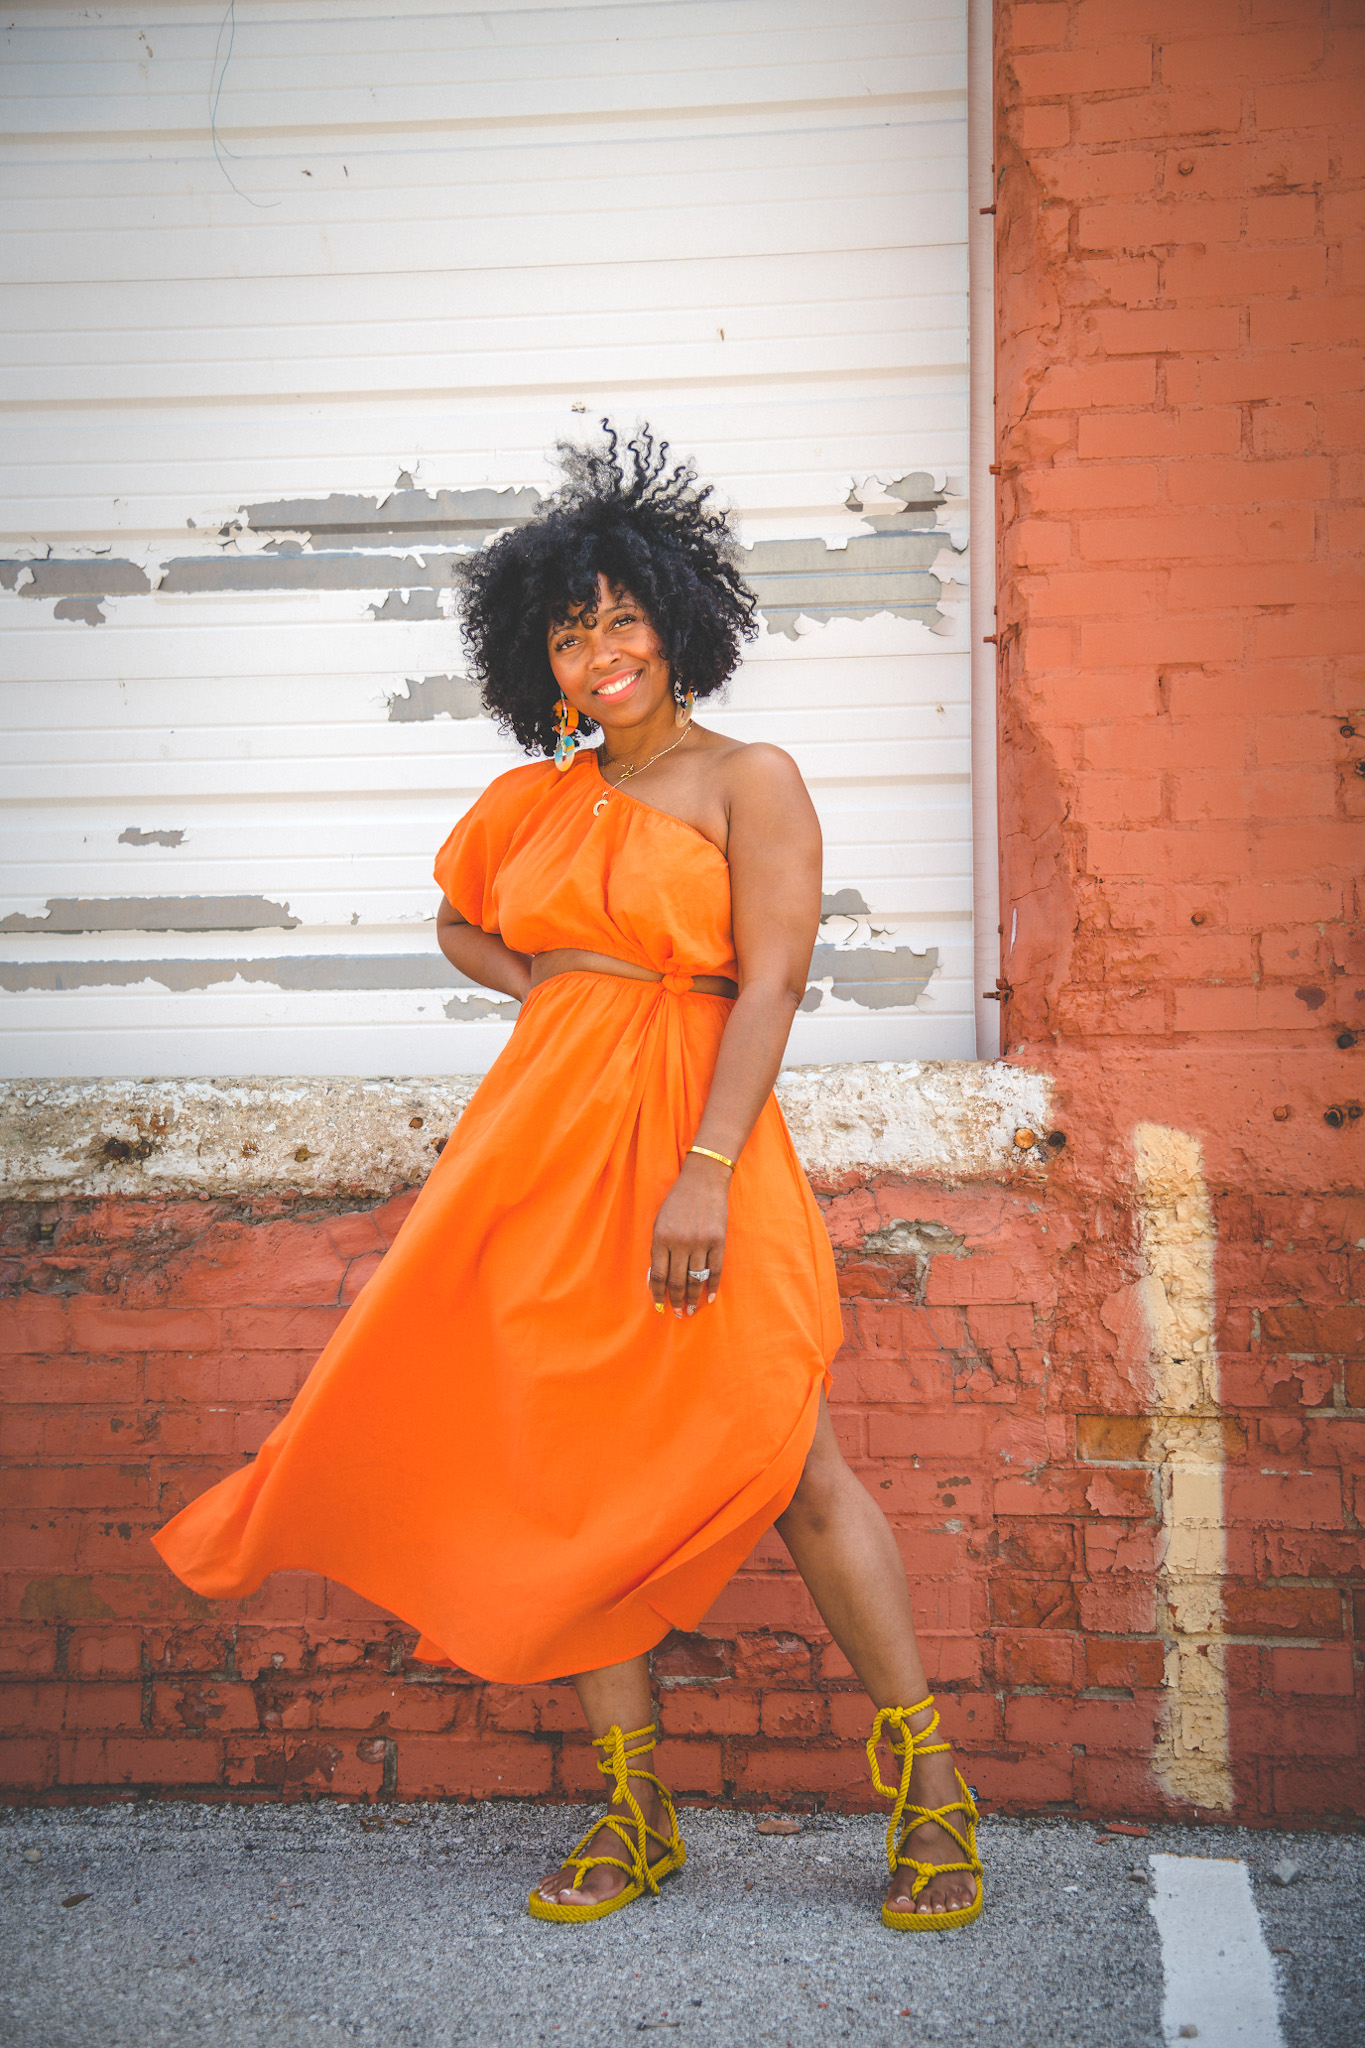 SWEENEE STYLE, SPRING OUTFIT IDEA, SUMMER OUTFIT IDEA, INDIANAPOLIS FASHION BLOGGER, BLACK GIRLS WHO BLOG, ADRIENNE FROM SWEENEE STYLE, SWEENEE LLC, NATURAL HAIR, HOW TO, WASH & GO